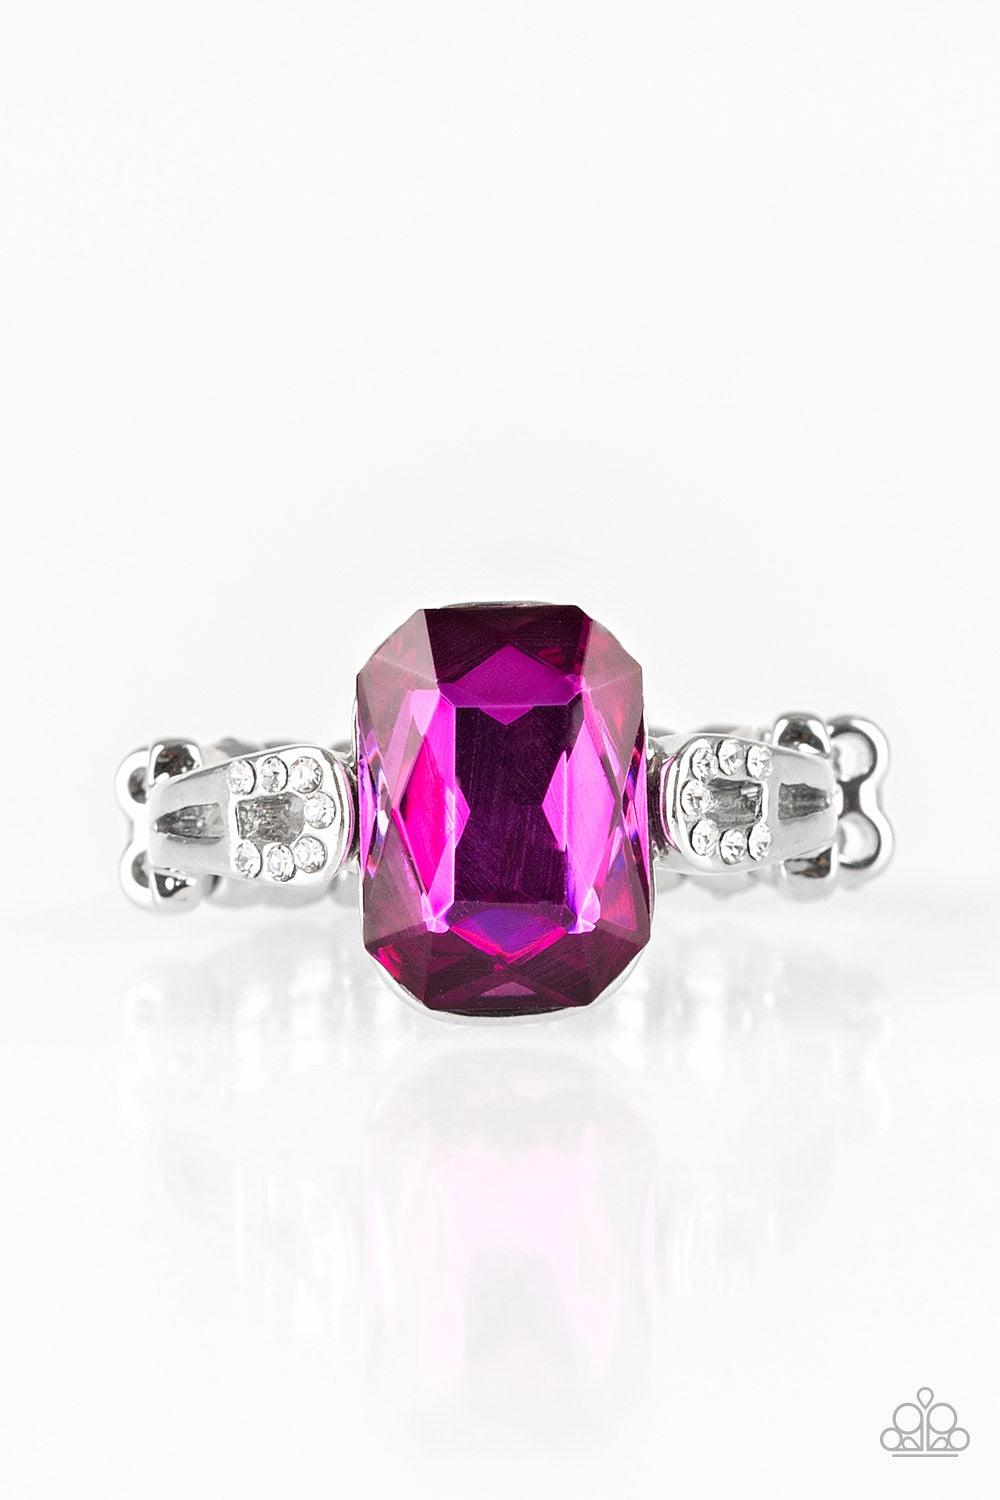 Paparazzi Accessories Feast Your Eyes - Pink Featuring a regal emerald style cut, a glittery pink gem is pressed into a dainty silver band dusted in glassy white rhinestones for a refined finish. Features a dainty stretchy band. Jewelry